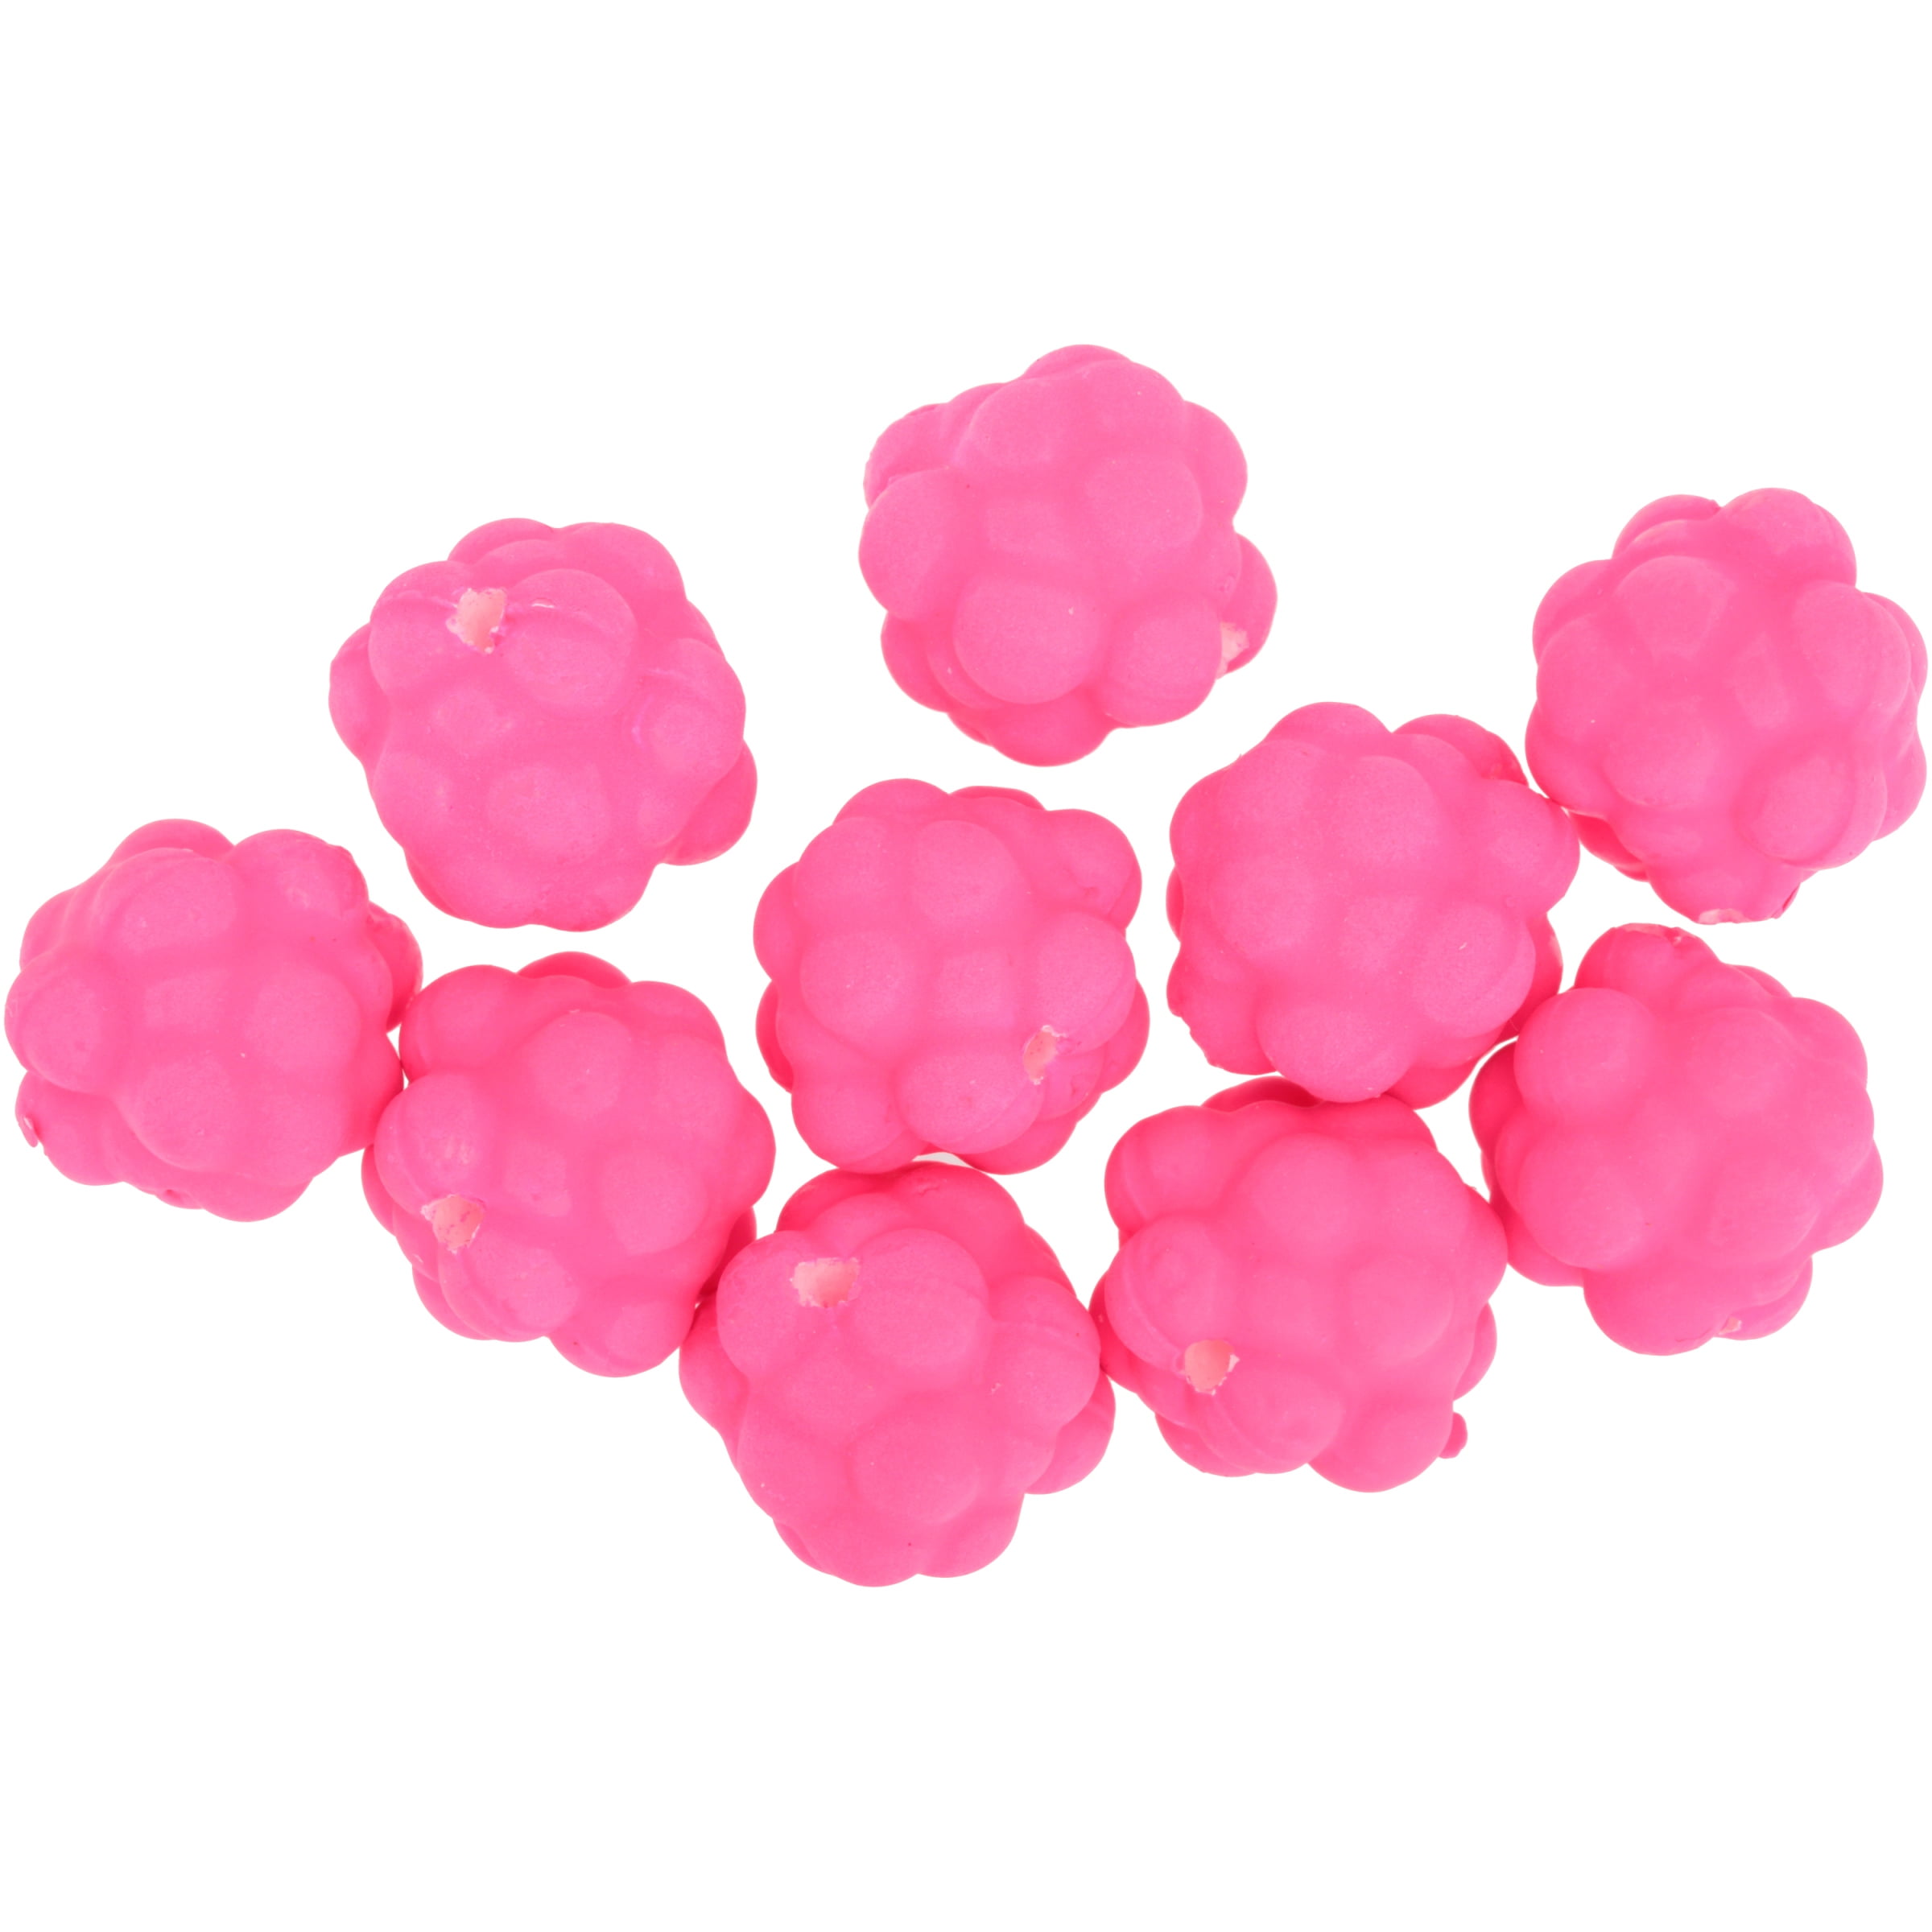 Worden's® Lil' Corky® Clusters Size 7 Pink Fluorescent Fishing Bait 10 ct.  Carded Pack 